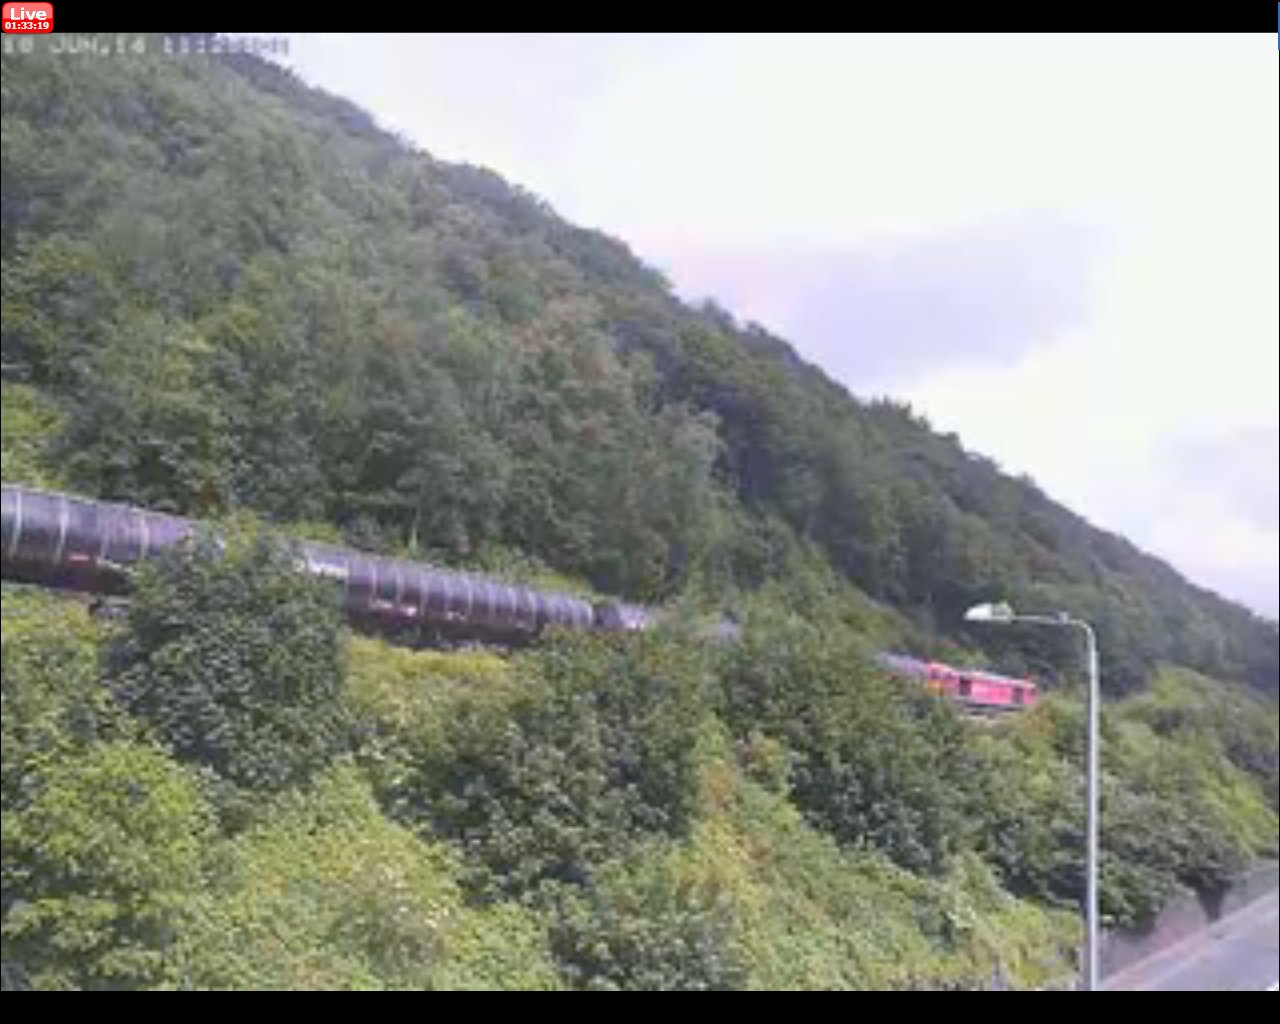 Screengrab from Railcam's installation at Eastwood, showing 683J, the ex-0855 Preston Docks Lanfina to Lindsey Oil Refinery train at 11:24 on Wednesday 18 June 2014.